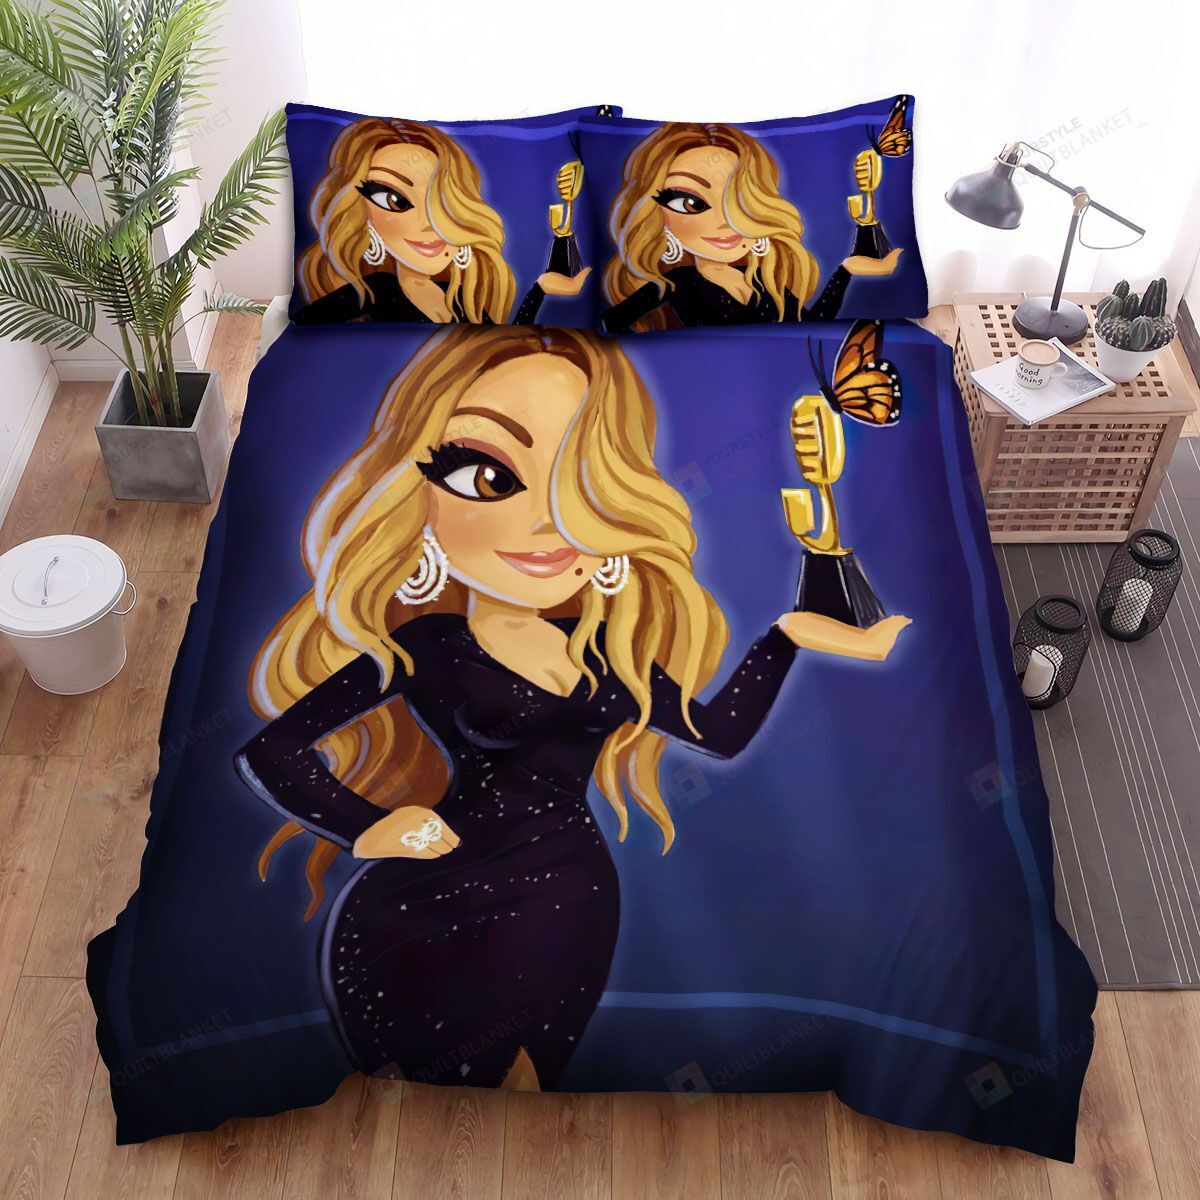 Mariah Carey Butterfly On The Award Bed Sheets Spread Comforter Duvet Cover Bedding Sets